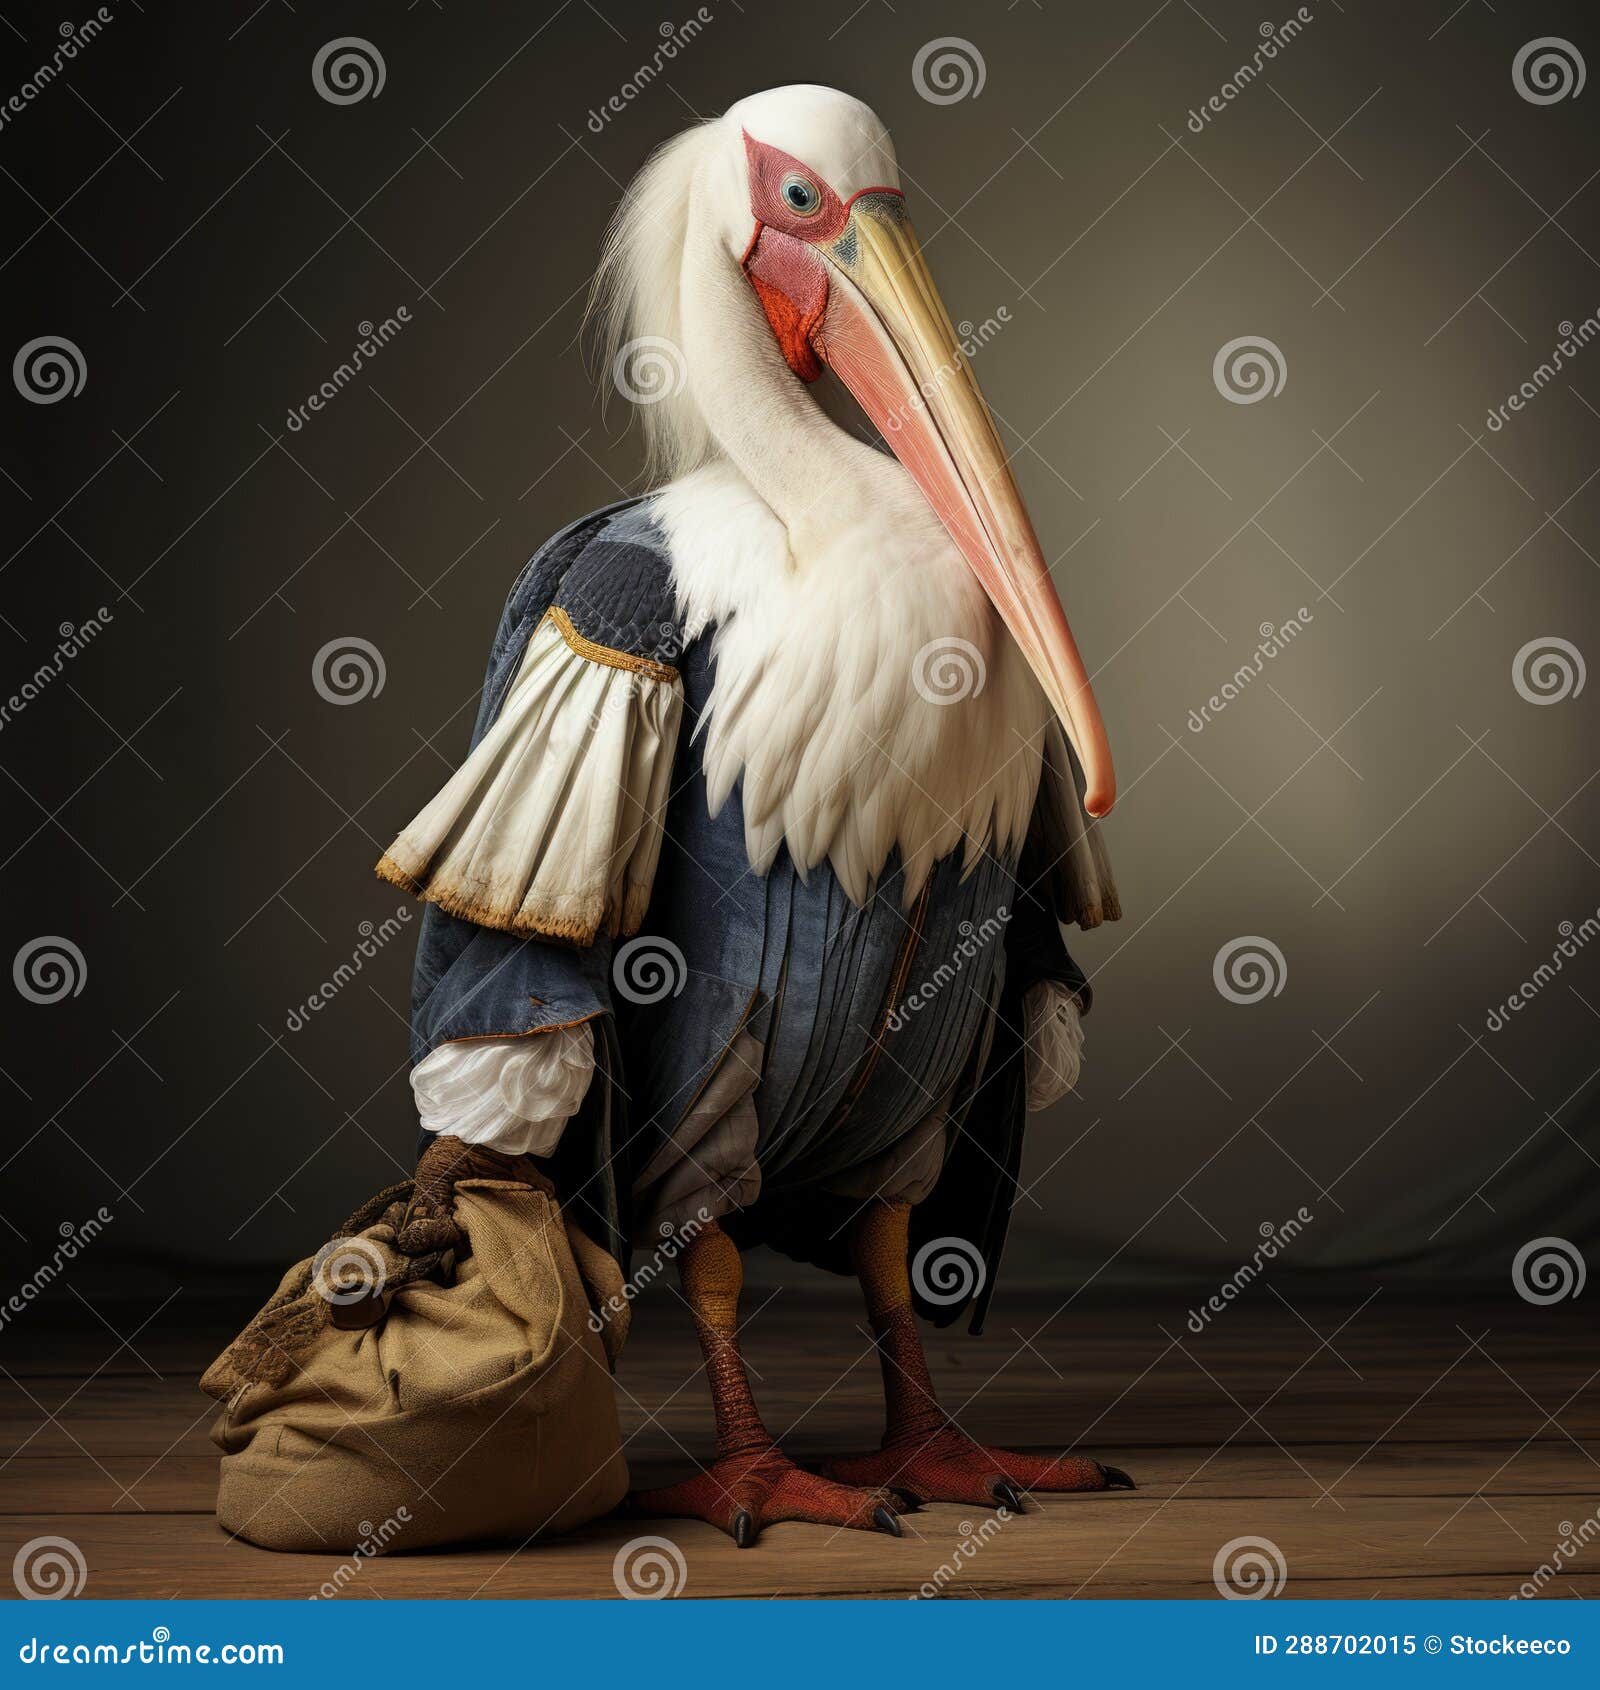 Pirate Pelican in Bavarian Clothing: a Hyperrealistic Composition